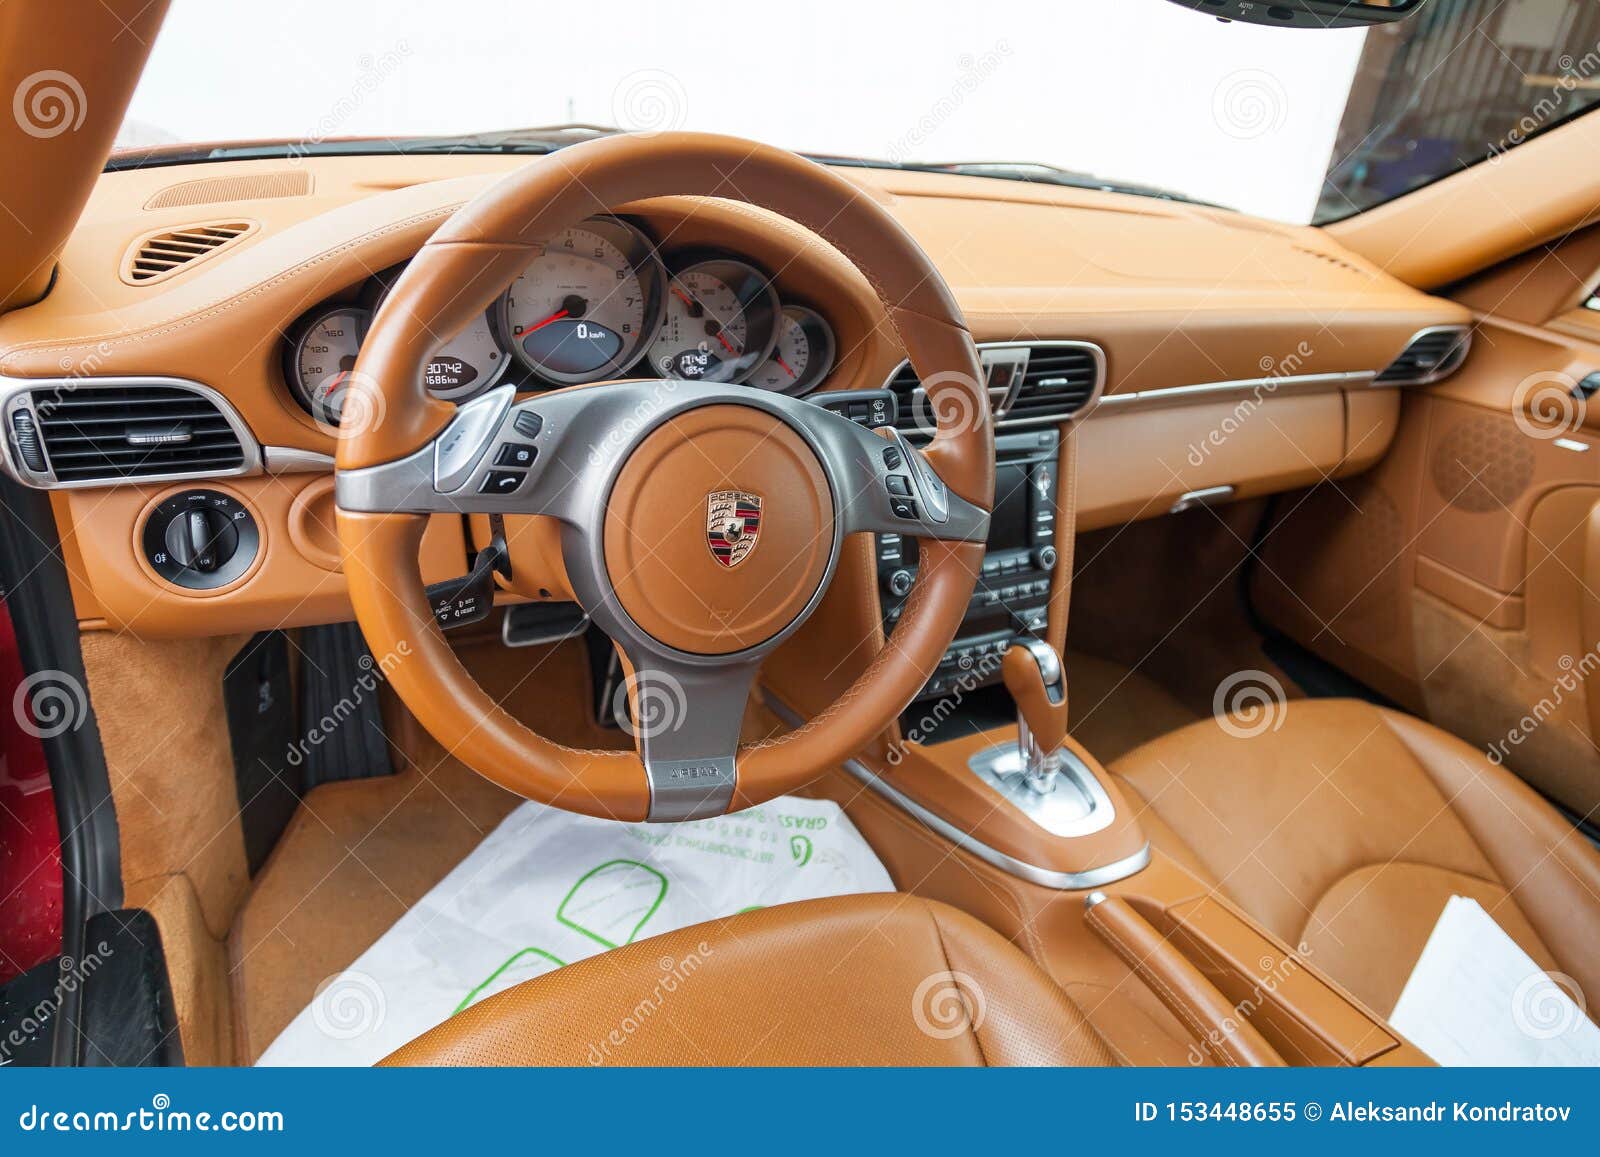 View To the Interior of Porsche Carrera 4s 911 with Dashboard, Clock, Media  System, Front Seats and Shiftgear after Cleaning Editorial Image - Image of  closeup, emblem: 153448655